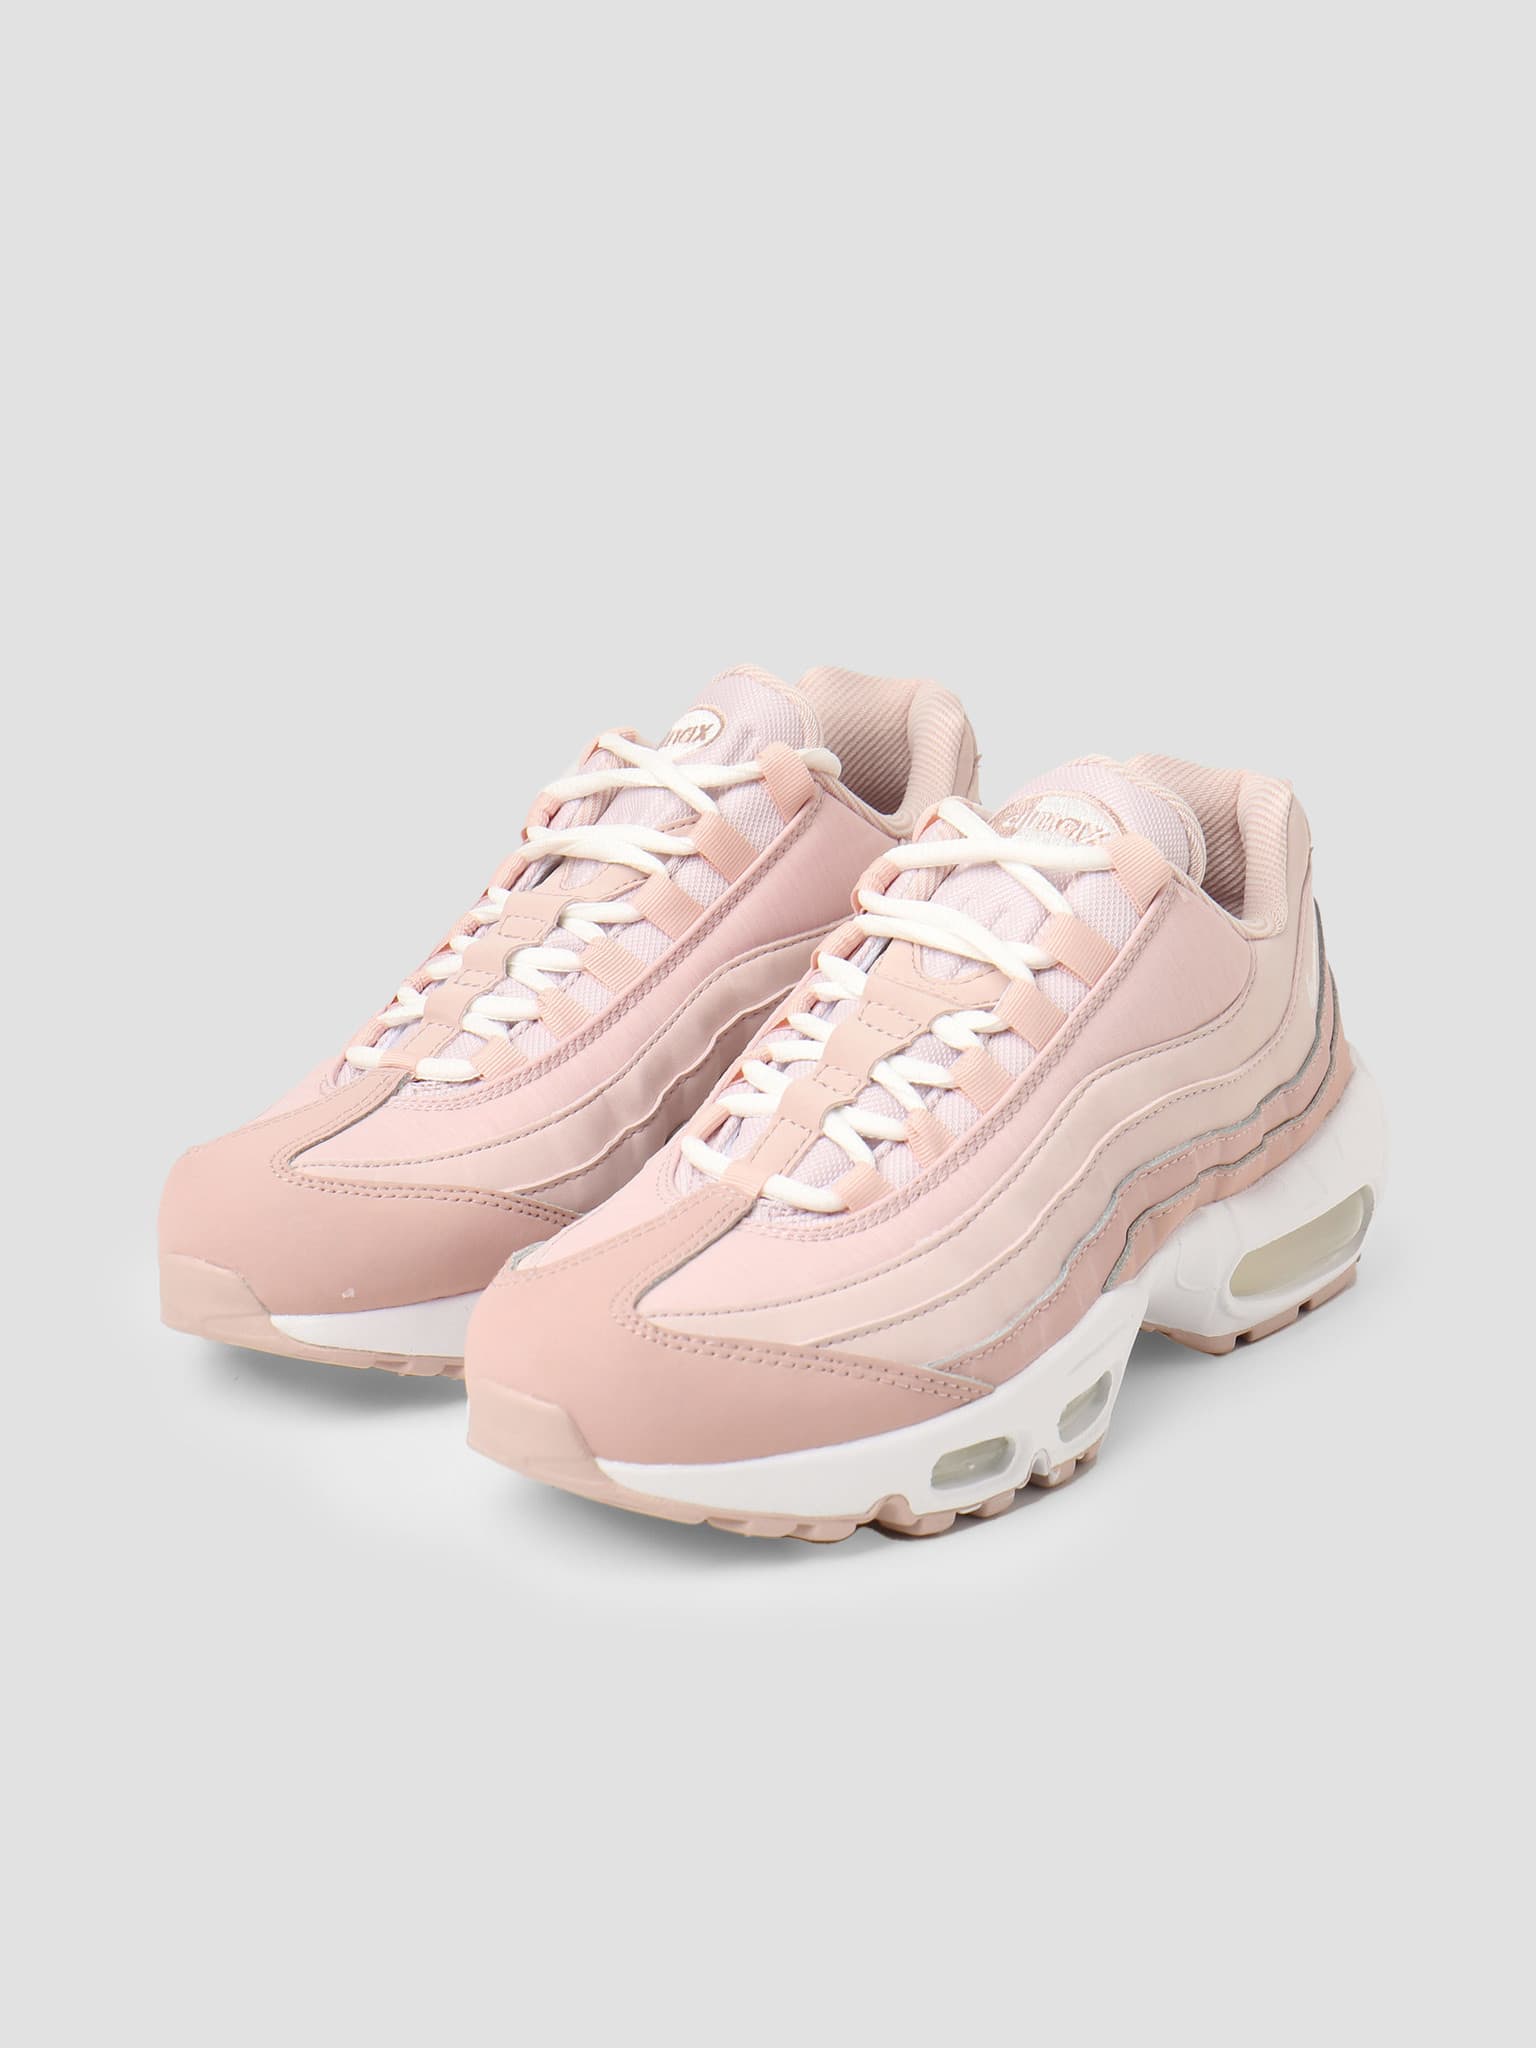 W Air Max 95 Pink Oxford Summit White Barely Rose DJ3859-600